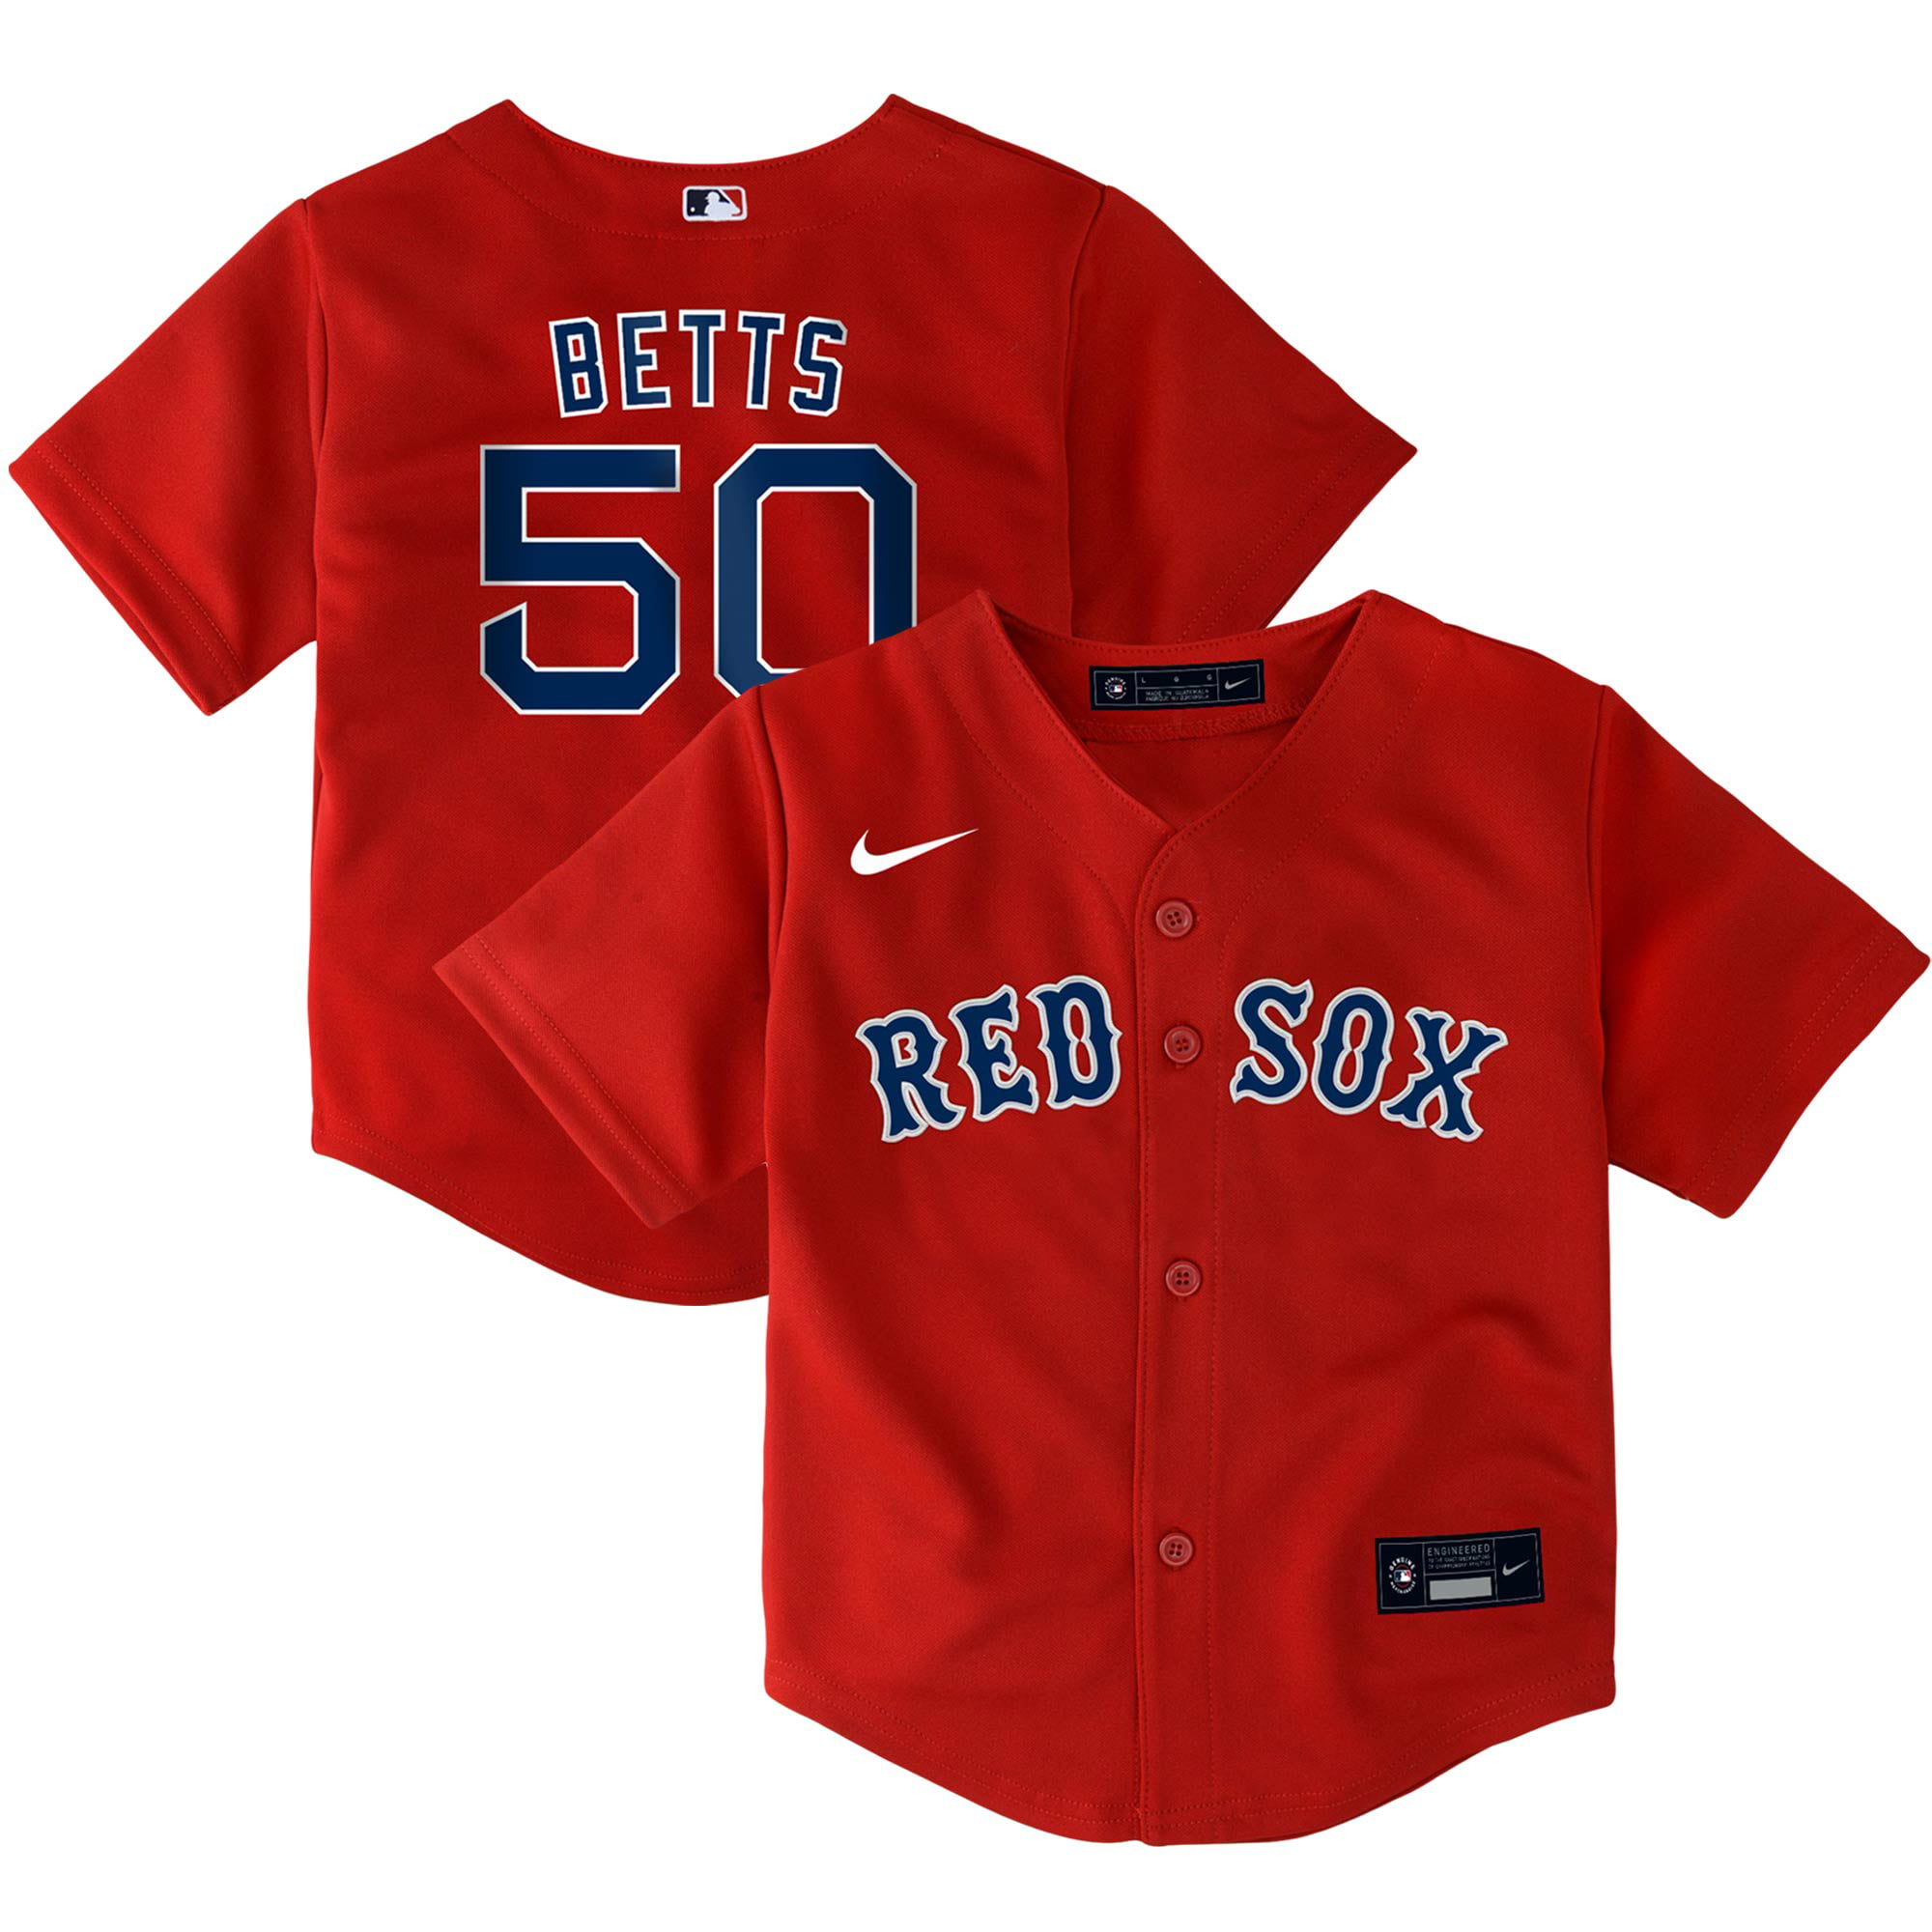 Mookie Betts Boston Red Sox Nike Toddler Alternate 2020 Replica Player Jersey - Red ...